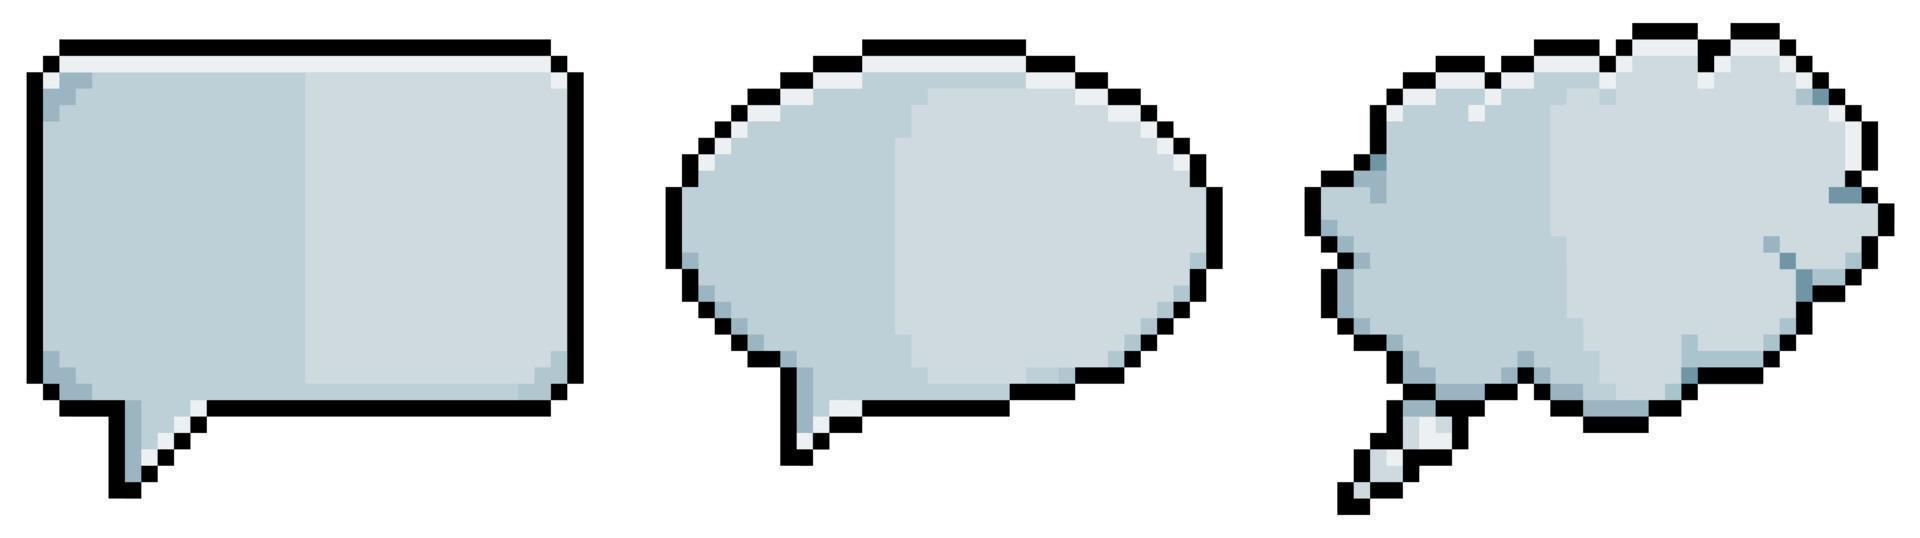 Pixel art speech and thought bubbles vector icon for 8bit game on white background